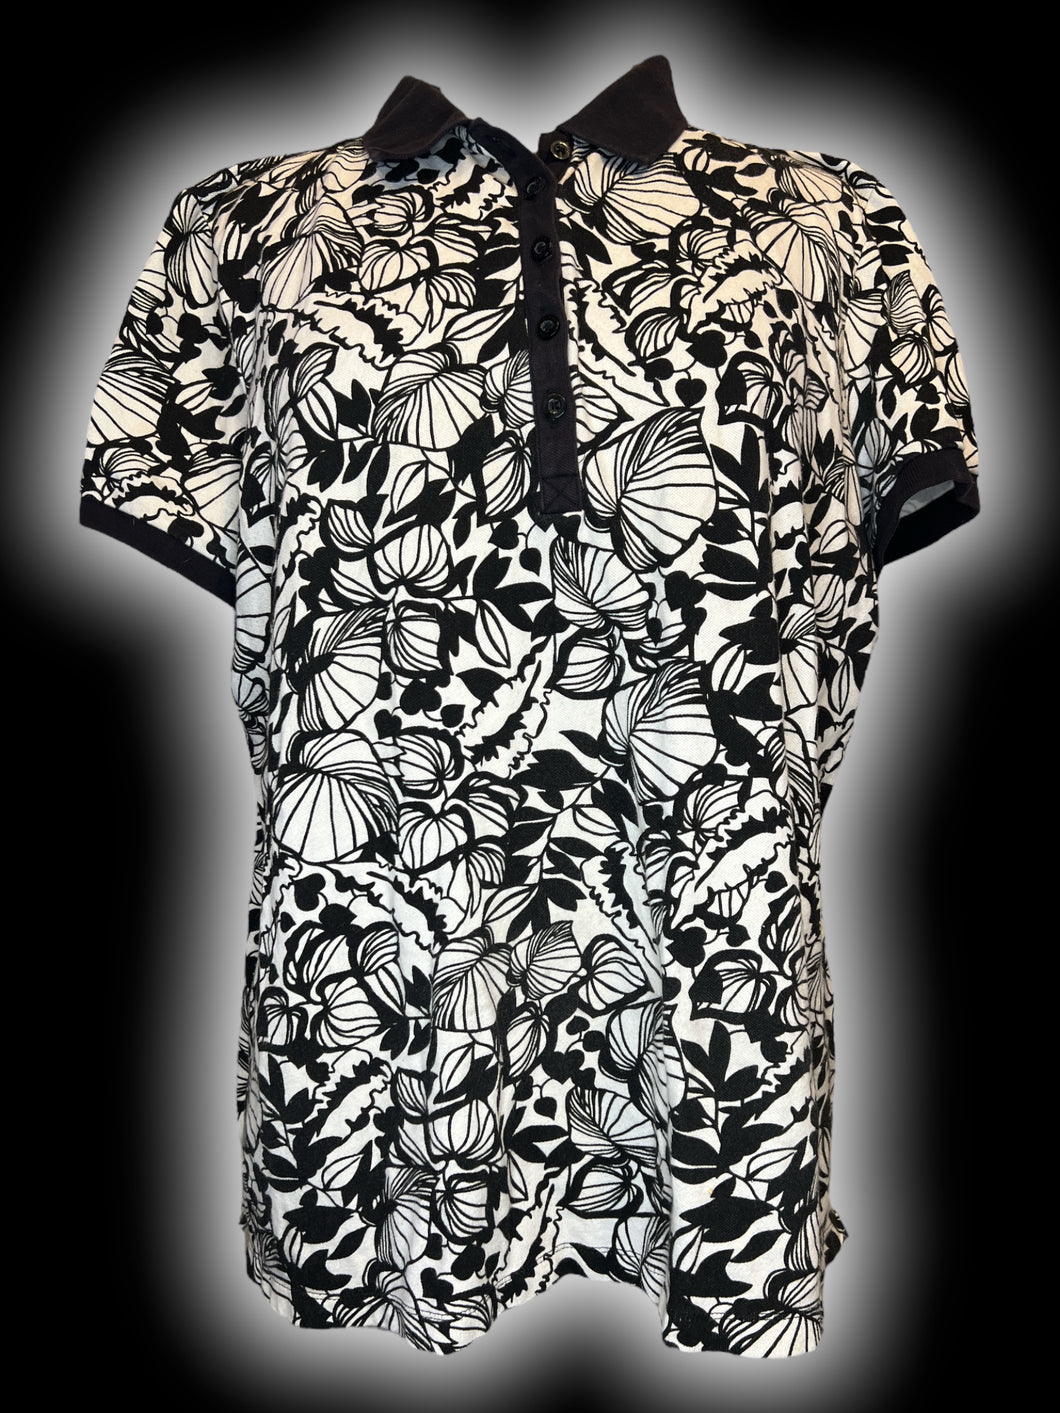 2X White & black short sleeve top w/ botanical pattern, & button-up bust